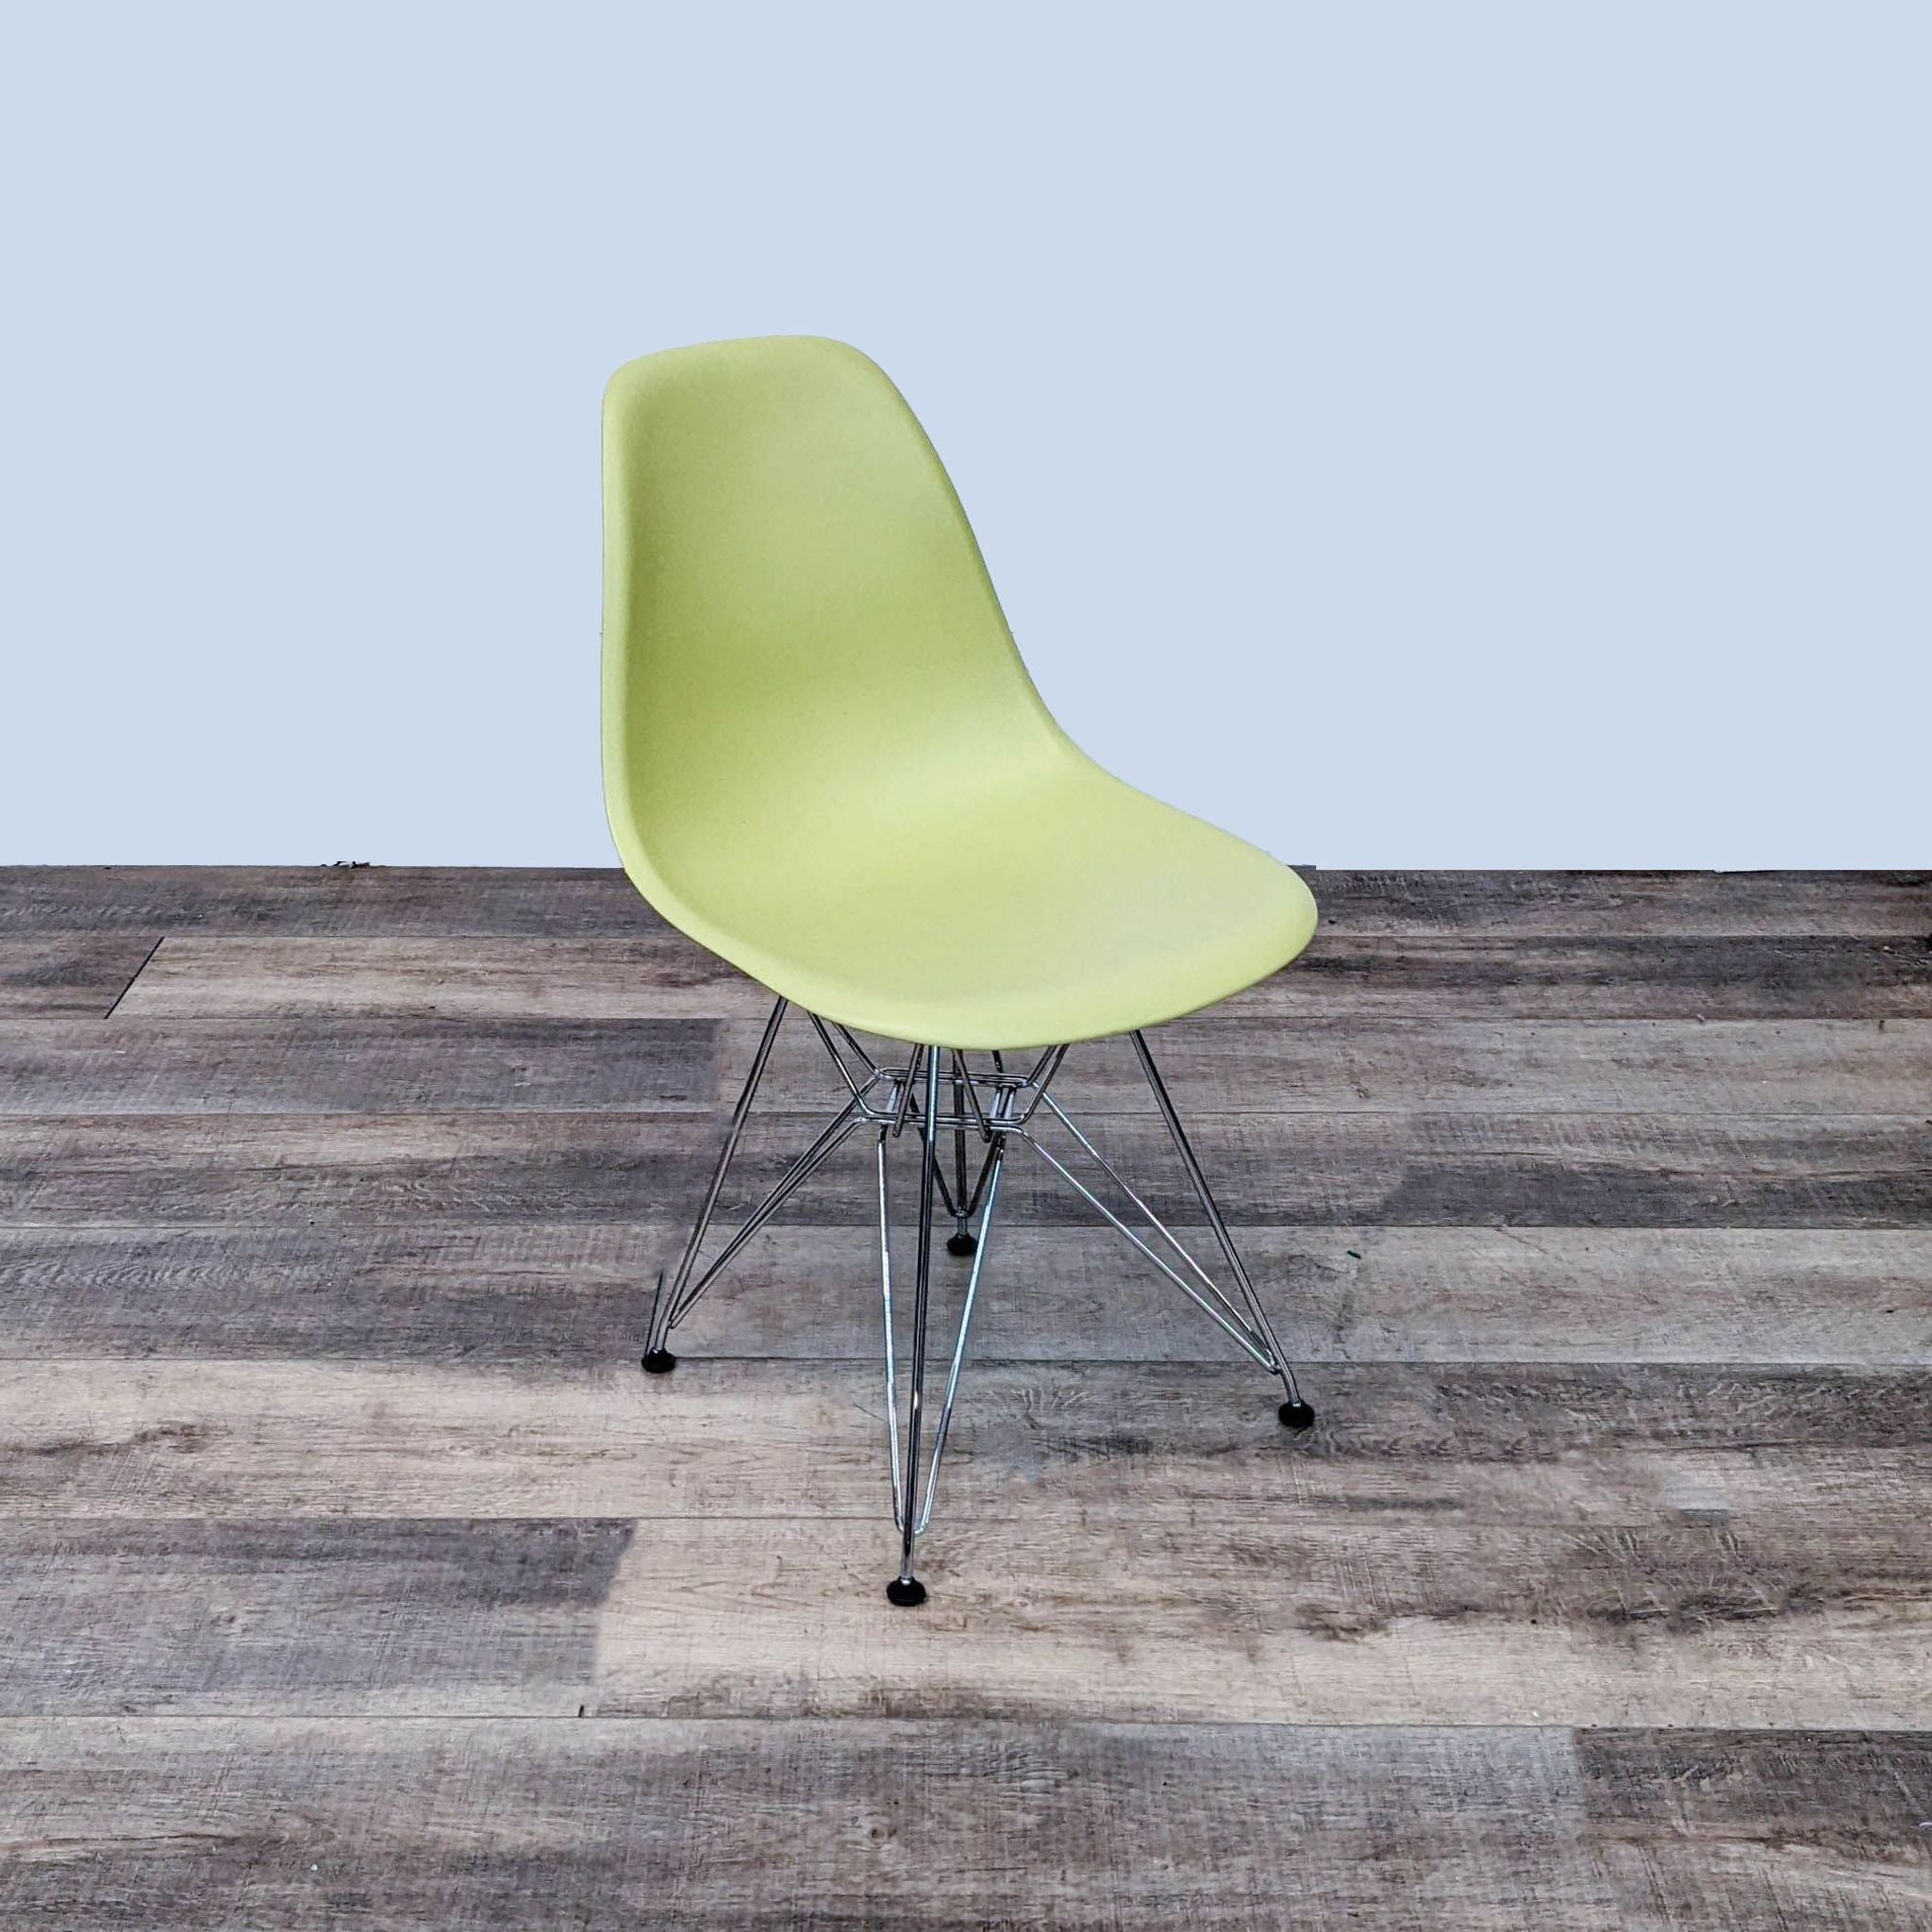 Vitra Eames dining chair with lime green molded plastic seat and chrome Eiffel wire base on wooden flooring.